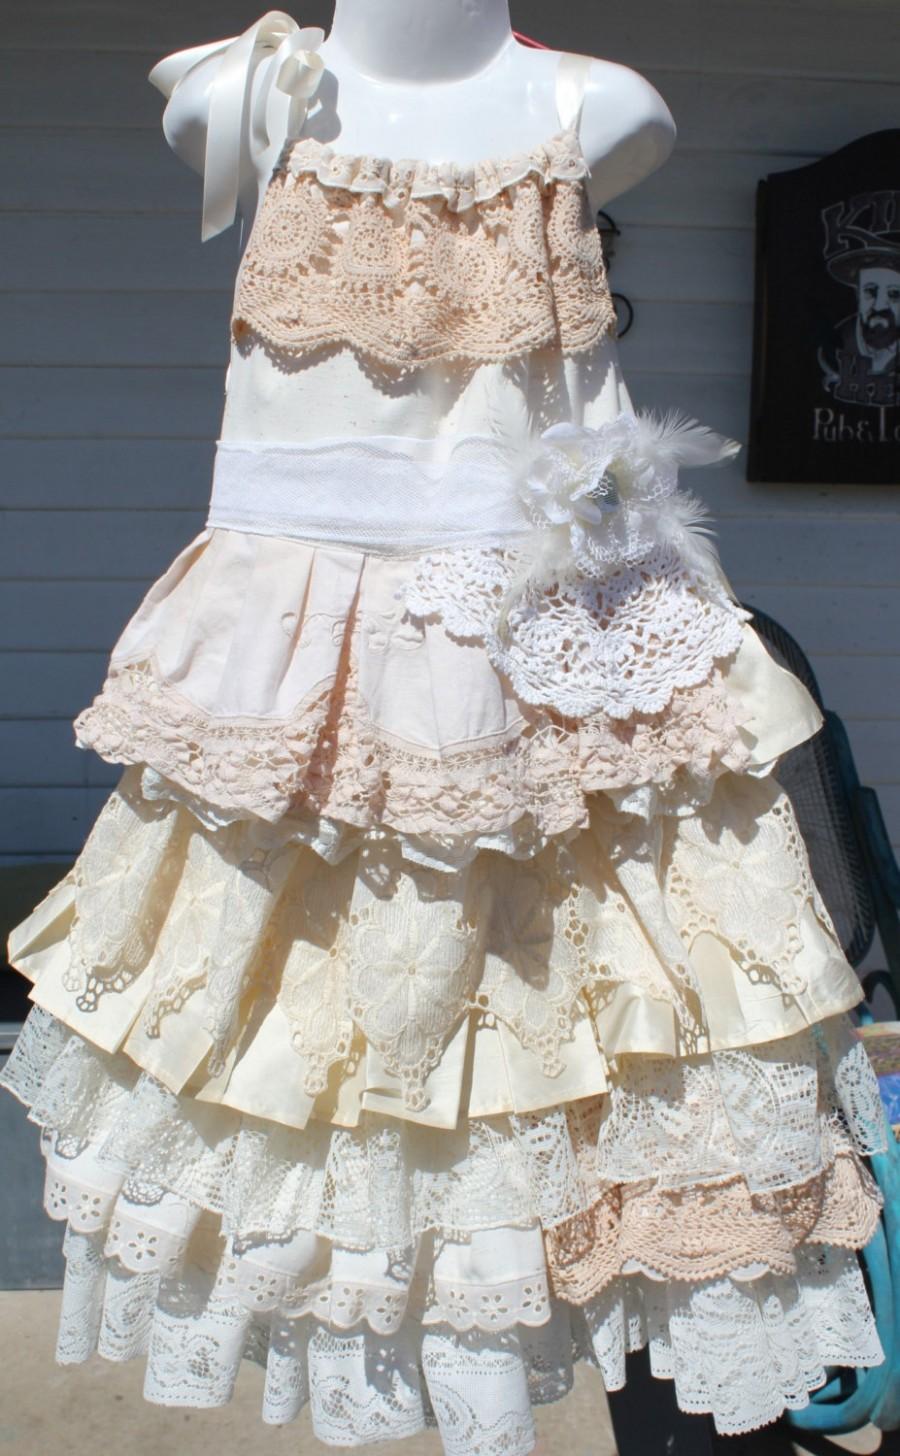 Wedding - boho, rustic,wedding, flower girl dress, size 5, 6 and 7, vintage layers ruffles,ribbon tie shoulders,cream, ivory, silk,lace,cotton,calico